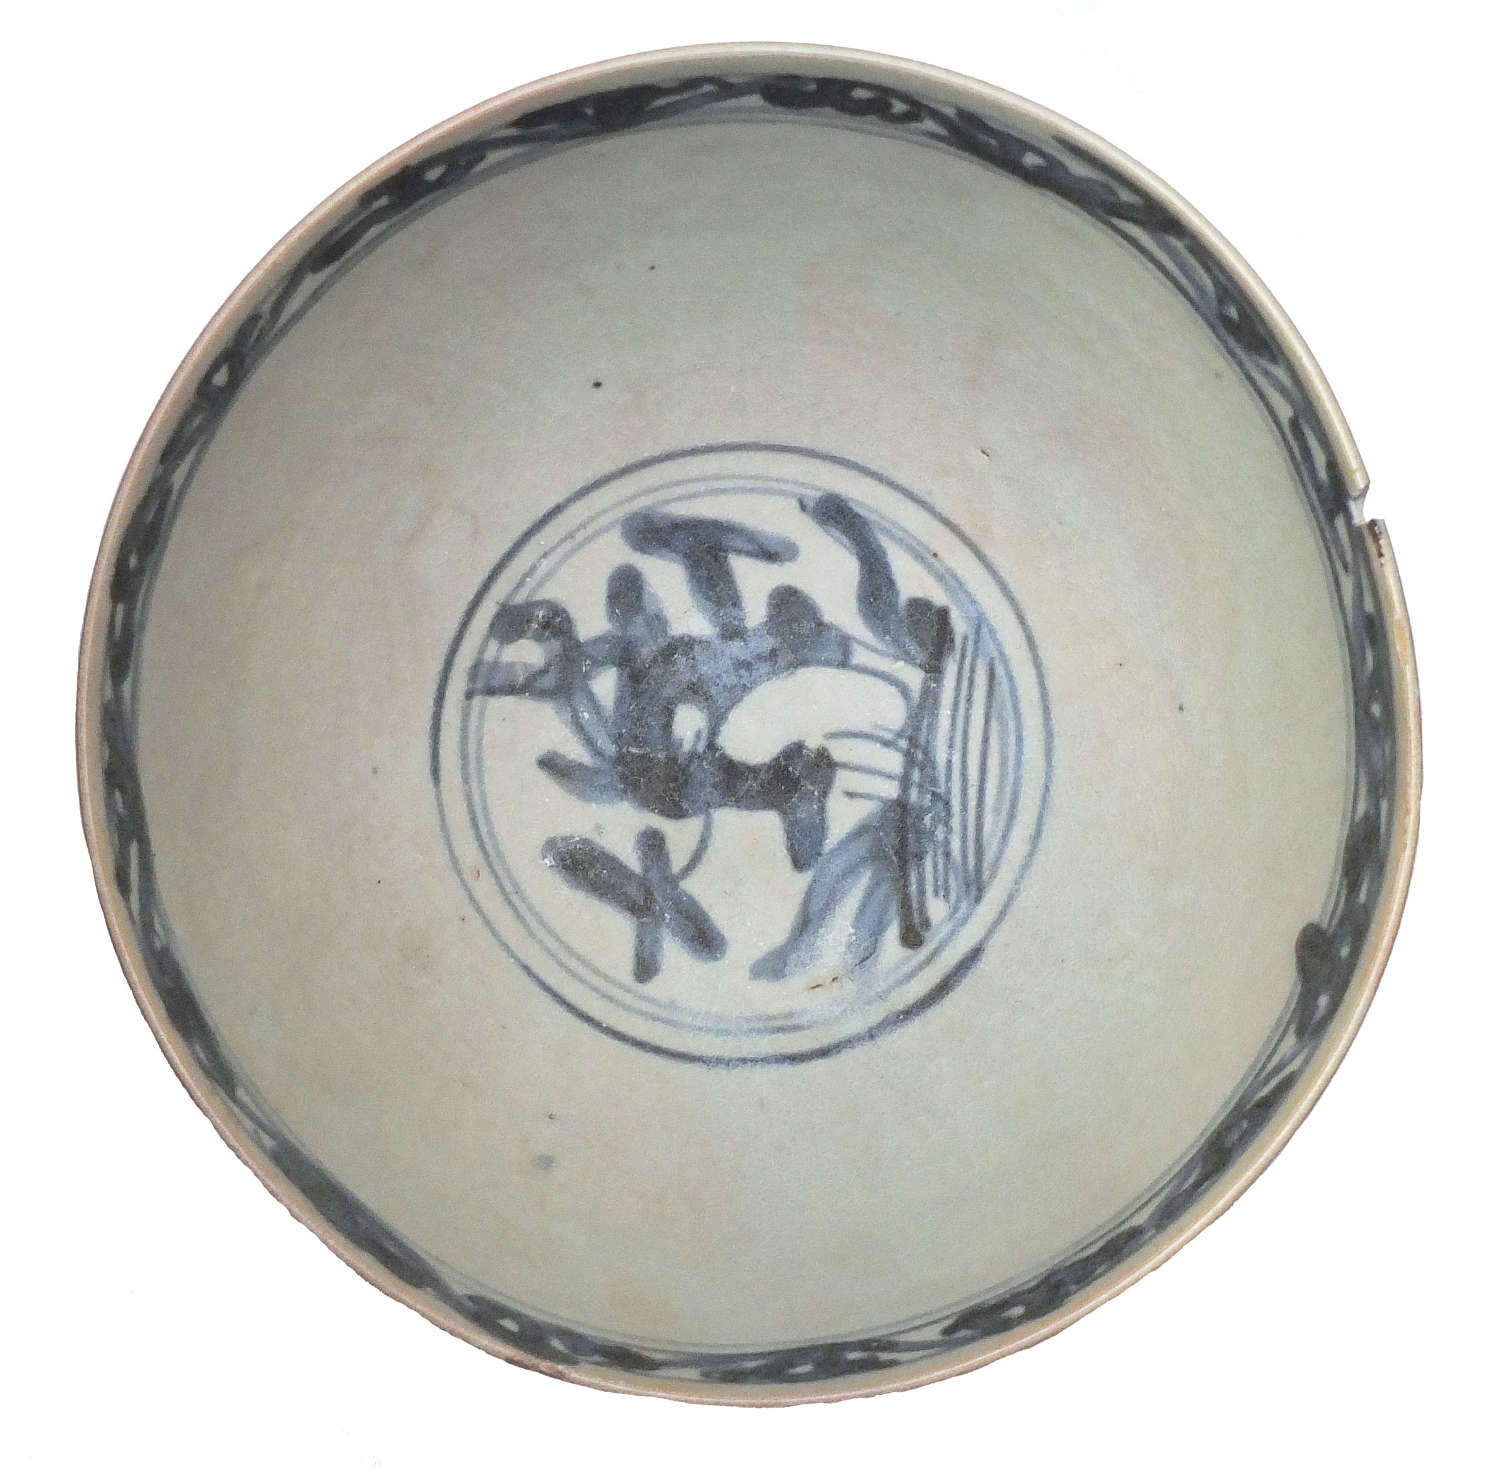 A large Chinese bowl from the Binh Thuan shipwreck, c. 1608 A.D.